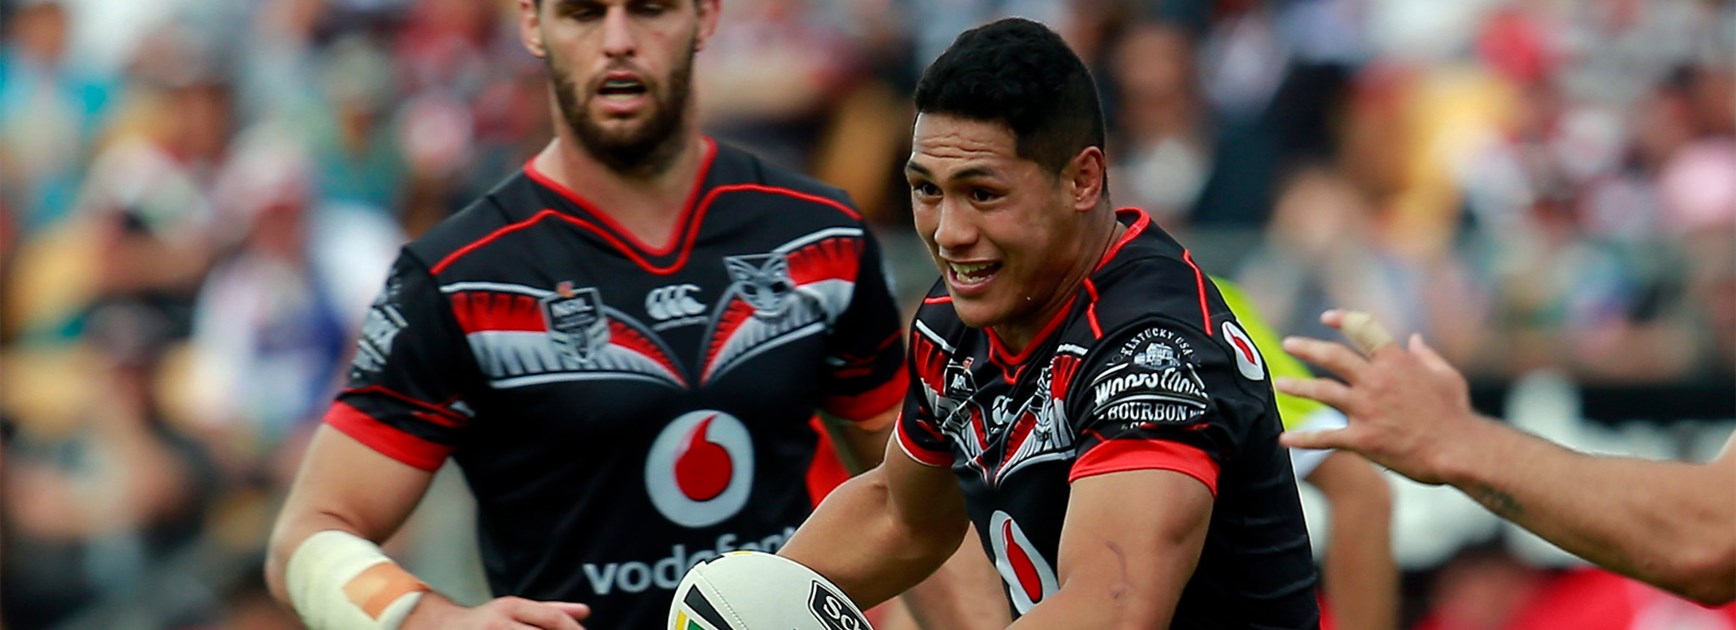 Roger Tuivasa-Sheck takes a run against the Melbourne Storm in Round 3.